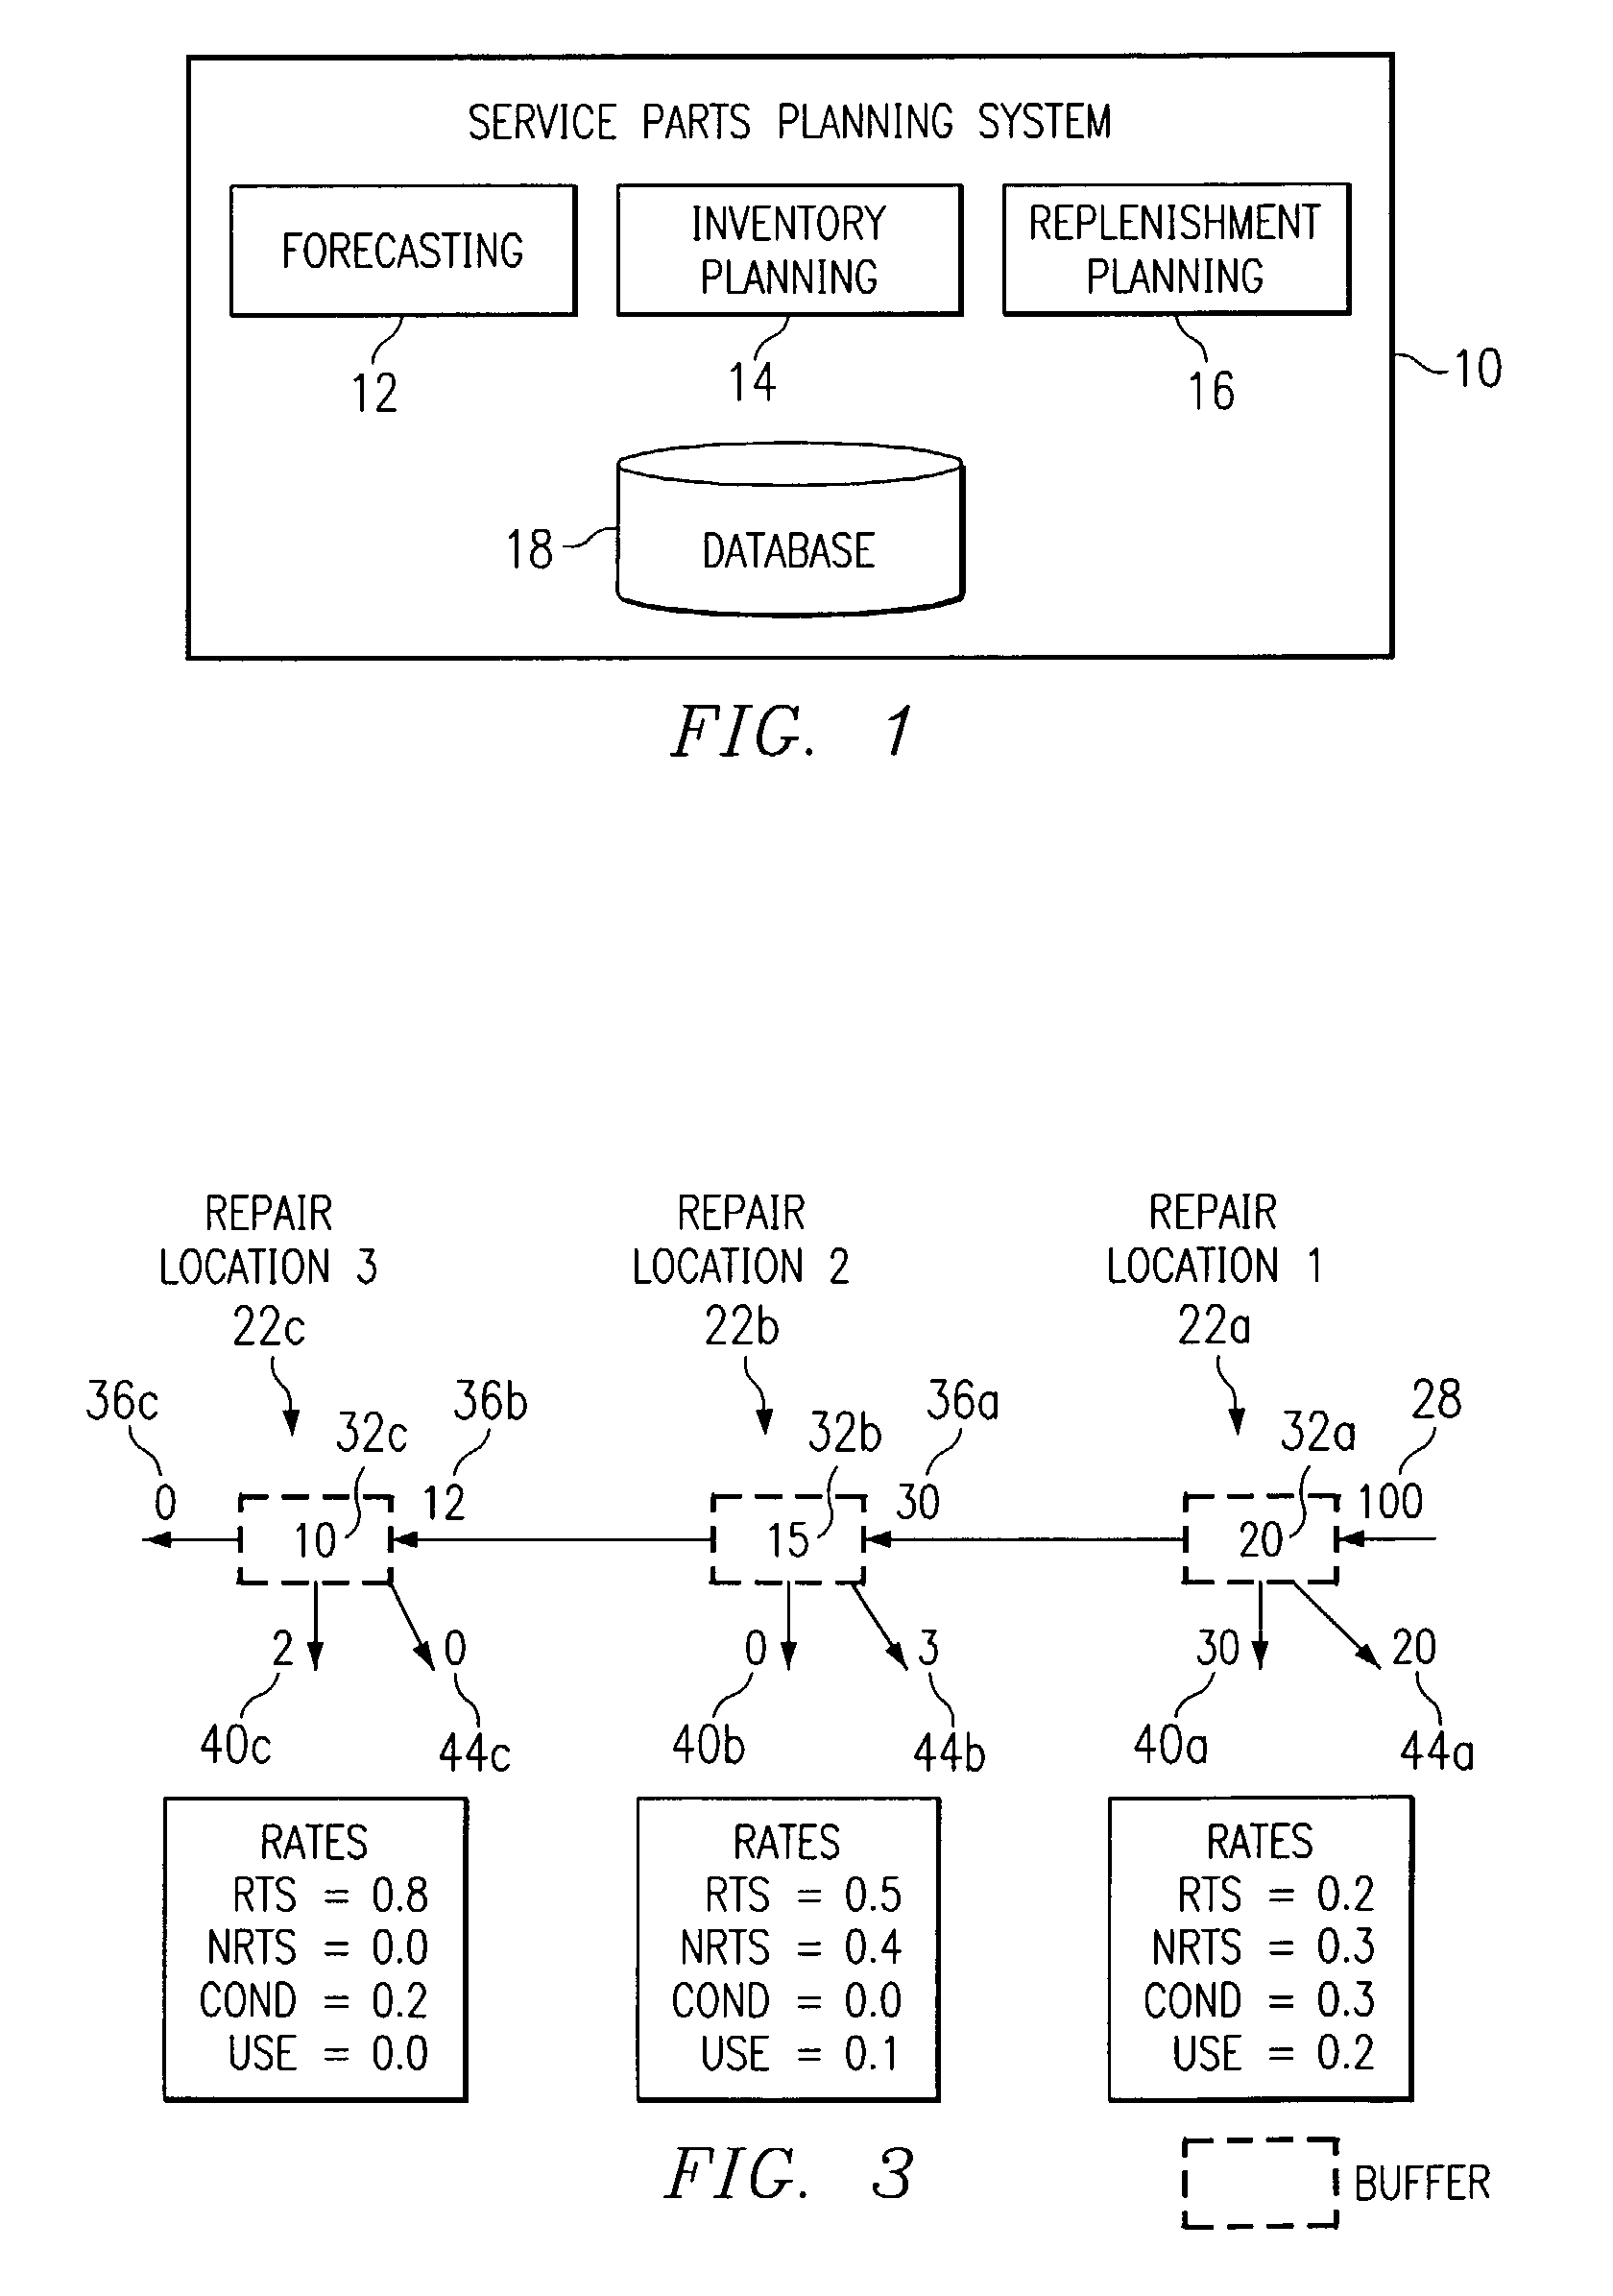 Push planning for unserviceable parts to facilitate repair planning in a repair network